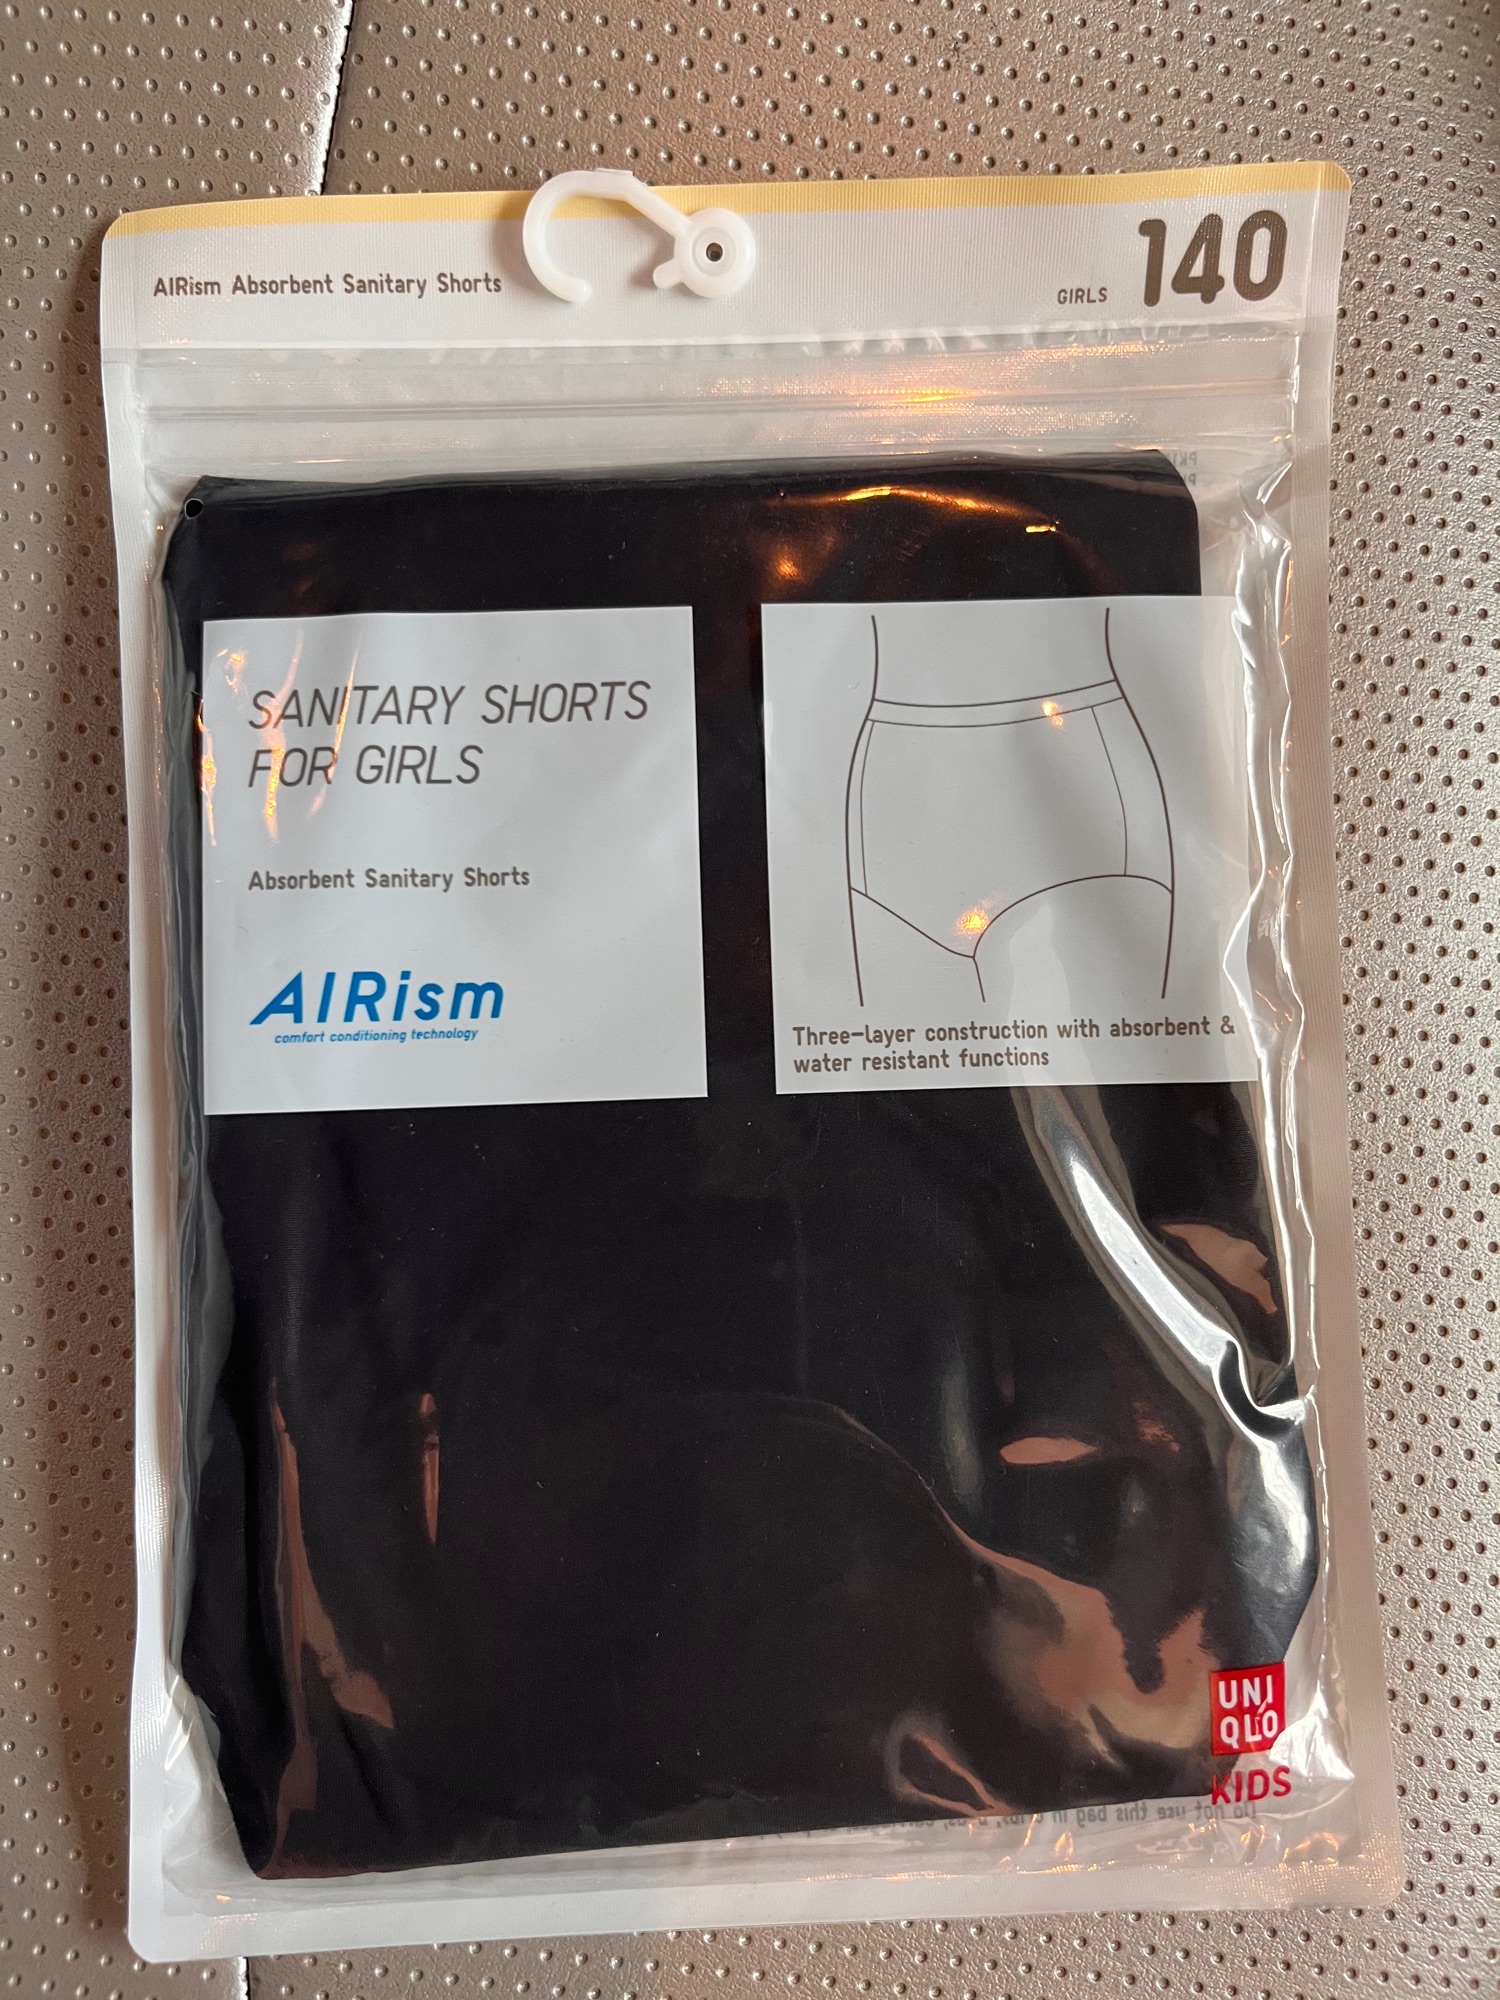 WOMEN'S AIRISM ABSORBENT SANITARY SHORTS